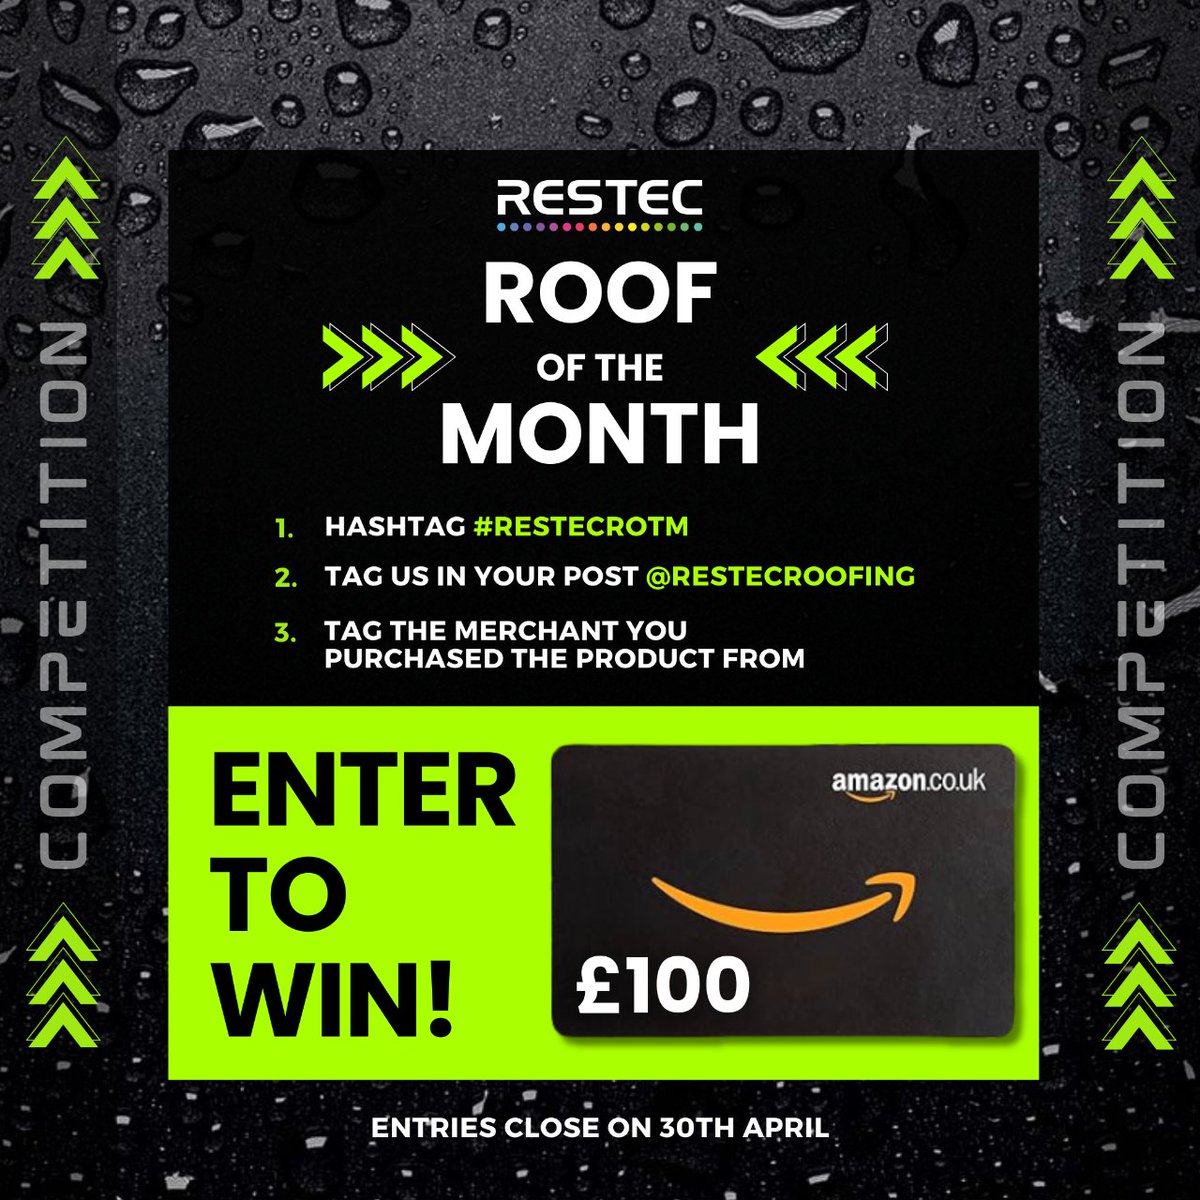 ✨𝗘𝗻𝘁𝗲𝗿 𝗥𝗲𝘀𝘁𝗲𝗰 𝗥𝗼𝗼𝗳 𝗼𝗳 𝘁𝗵𝗲 𝗠𝗼𝗻𝘁𝗵 ✨ 𝗪𝗜𝗡: £100 Amazon Voucher

The top 4 roofs will be chosen by a panel of experts with a public vote to take place on the first week of May!

ENTER NOW ⚠️

#restecrotm #flatroofing #competition